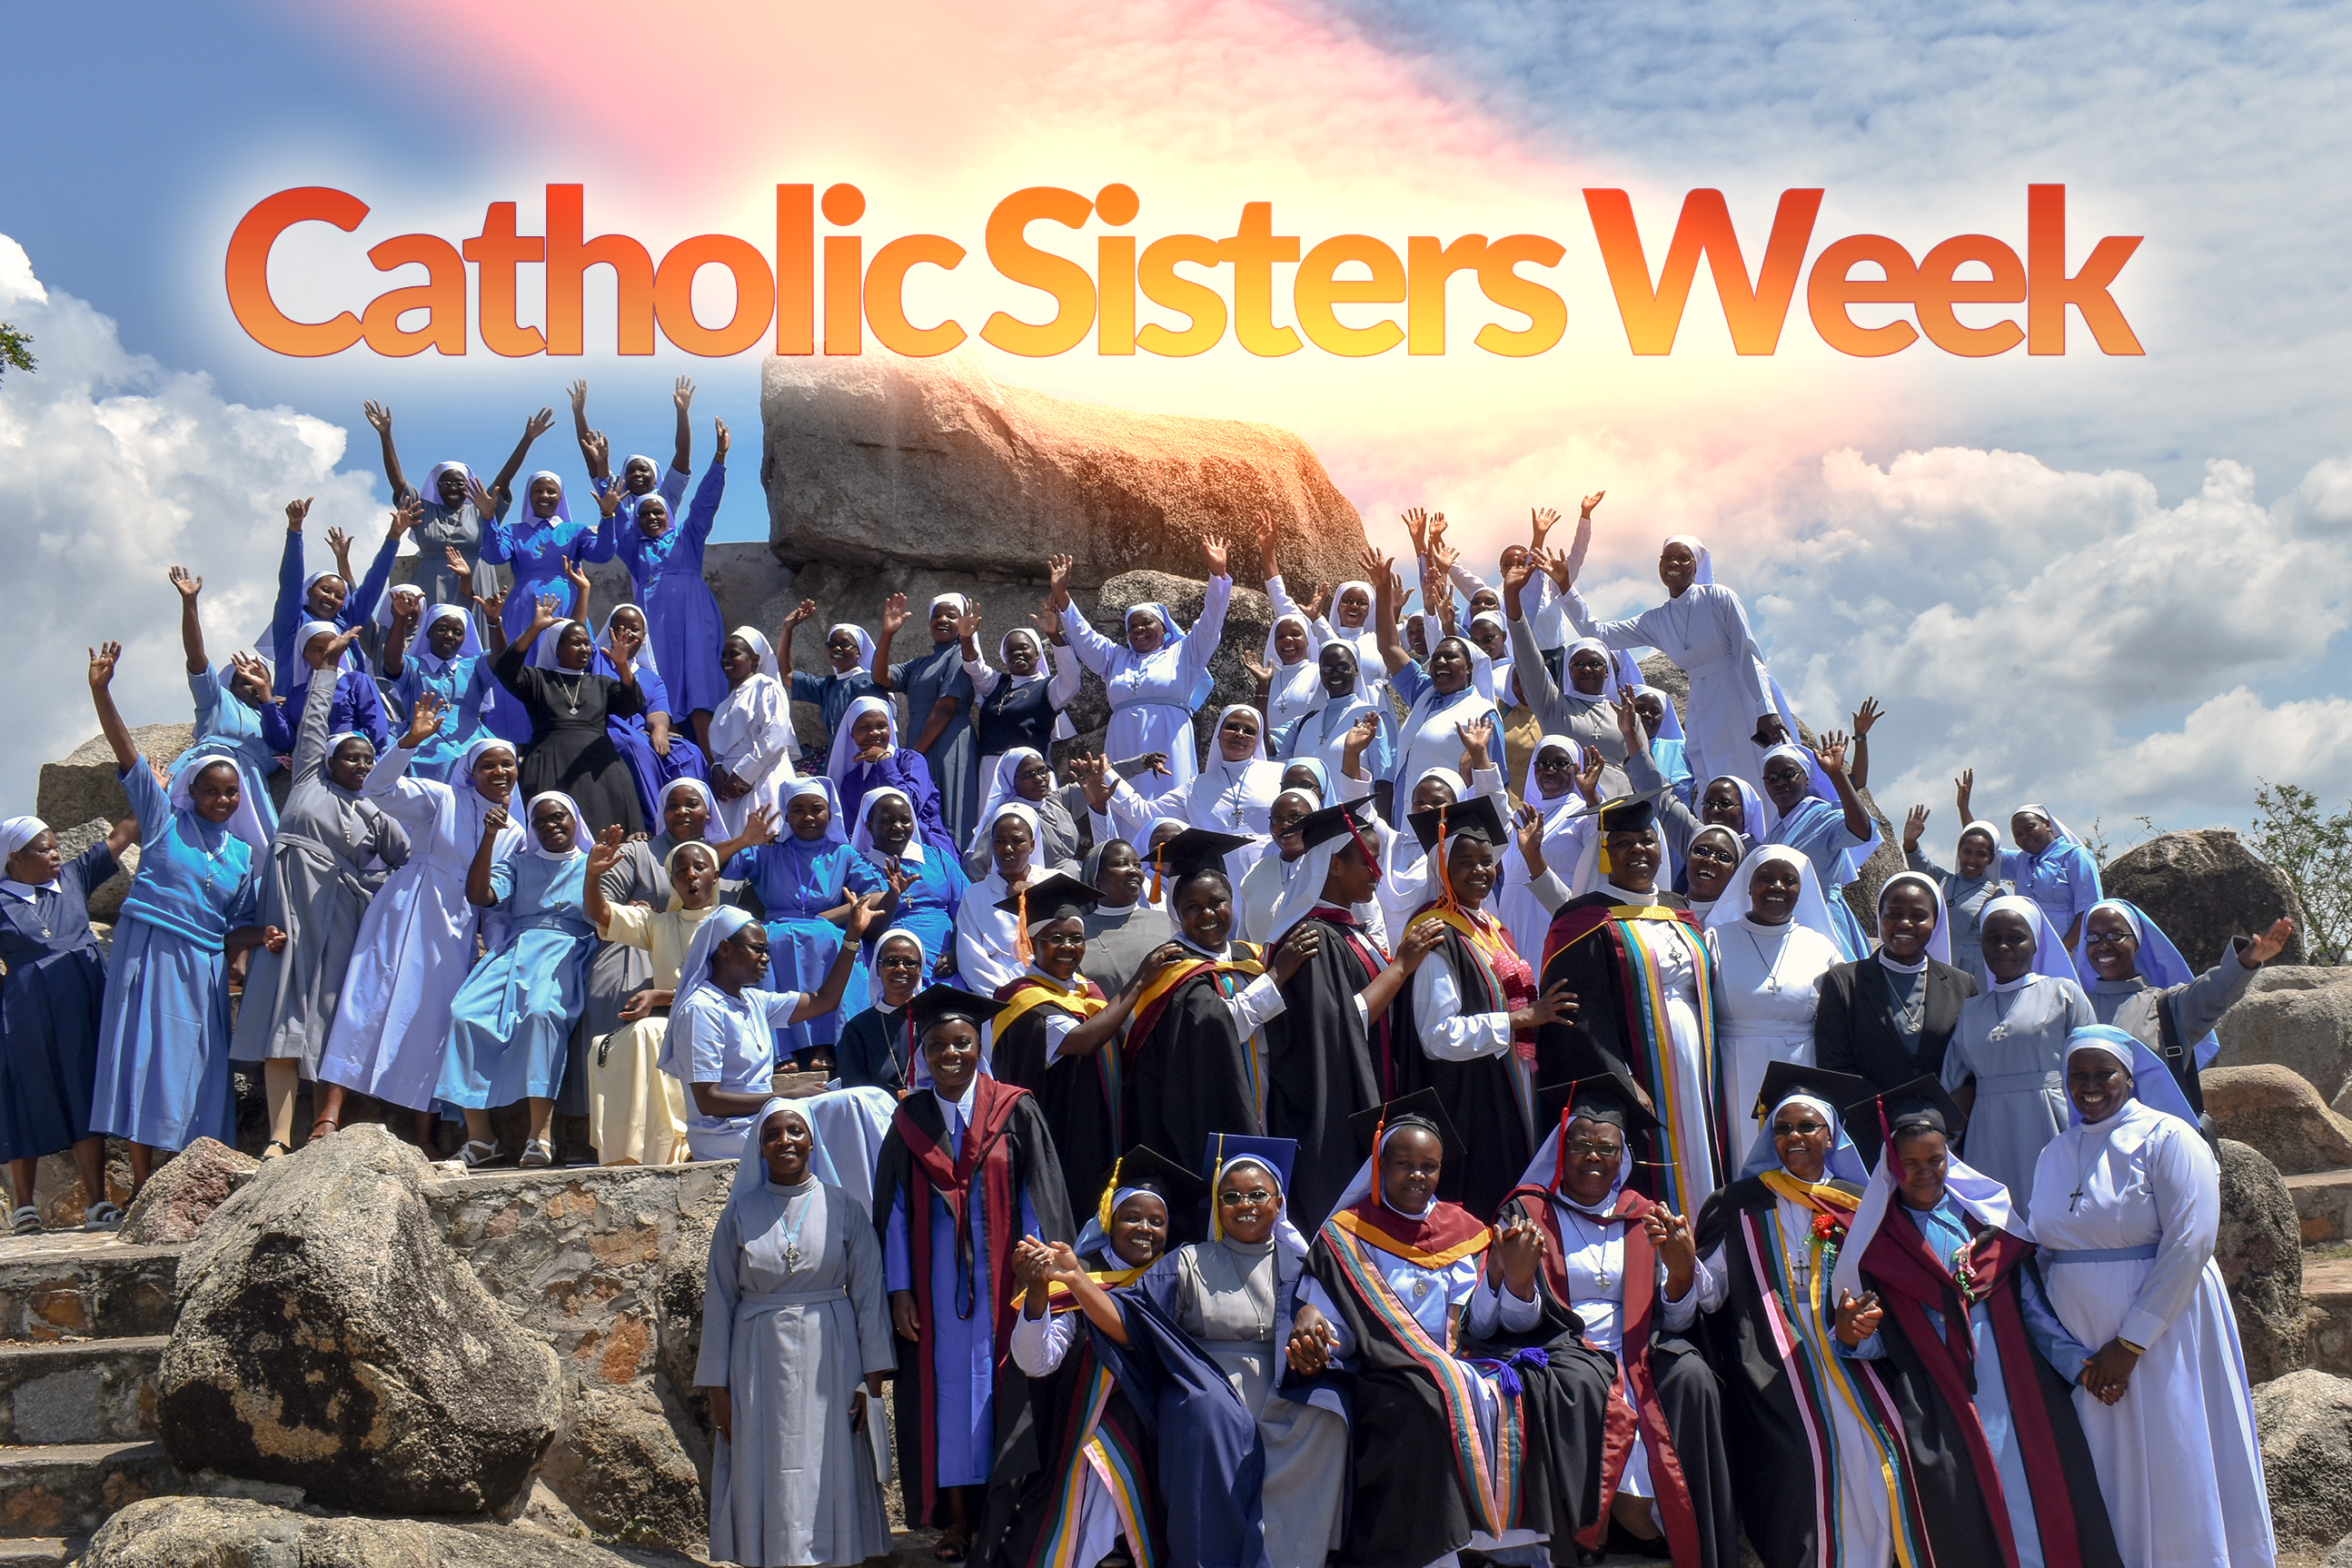 52 weeks a year women religious stand with the poor and immigrants, teach children, fight injustice, heal the sick, share spirituality, empower women, defend the planet, promote peace, create community and offer hope. But for one week each year in March, we shine the spotlight on women religious during Catholic Sisters Week. Above, sisters celebrate the graduation of HESA participants from ASEC partner university, St. Augustine University College (SAUT), in Mwanza, Tanzania.